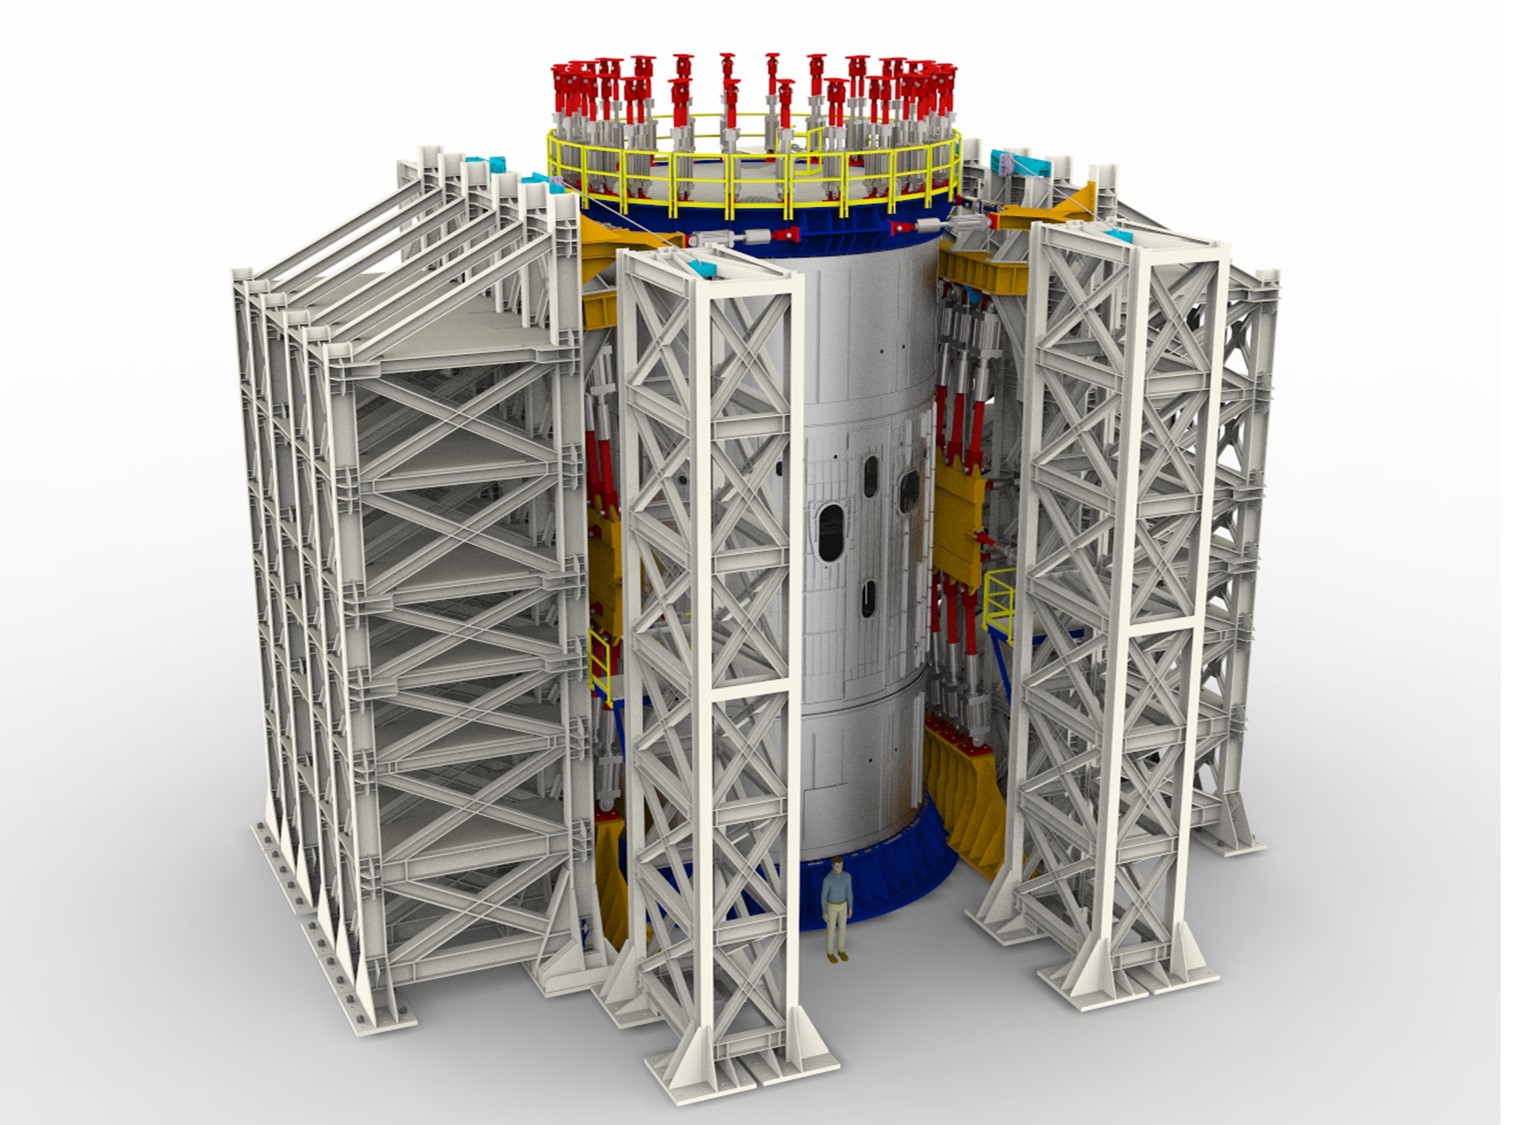 It Takes A Serious Structure To Test The World’s Most Powerful Rocket